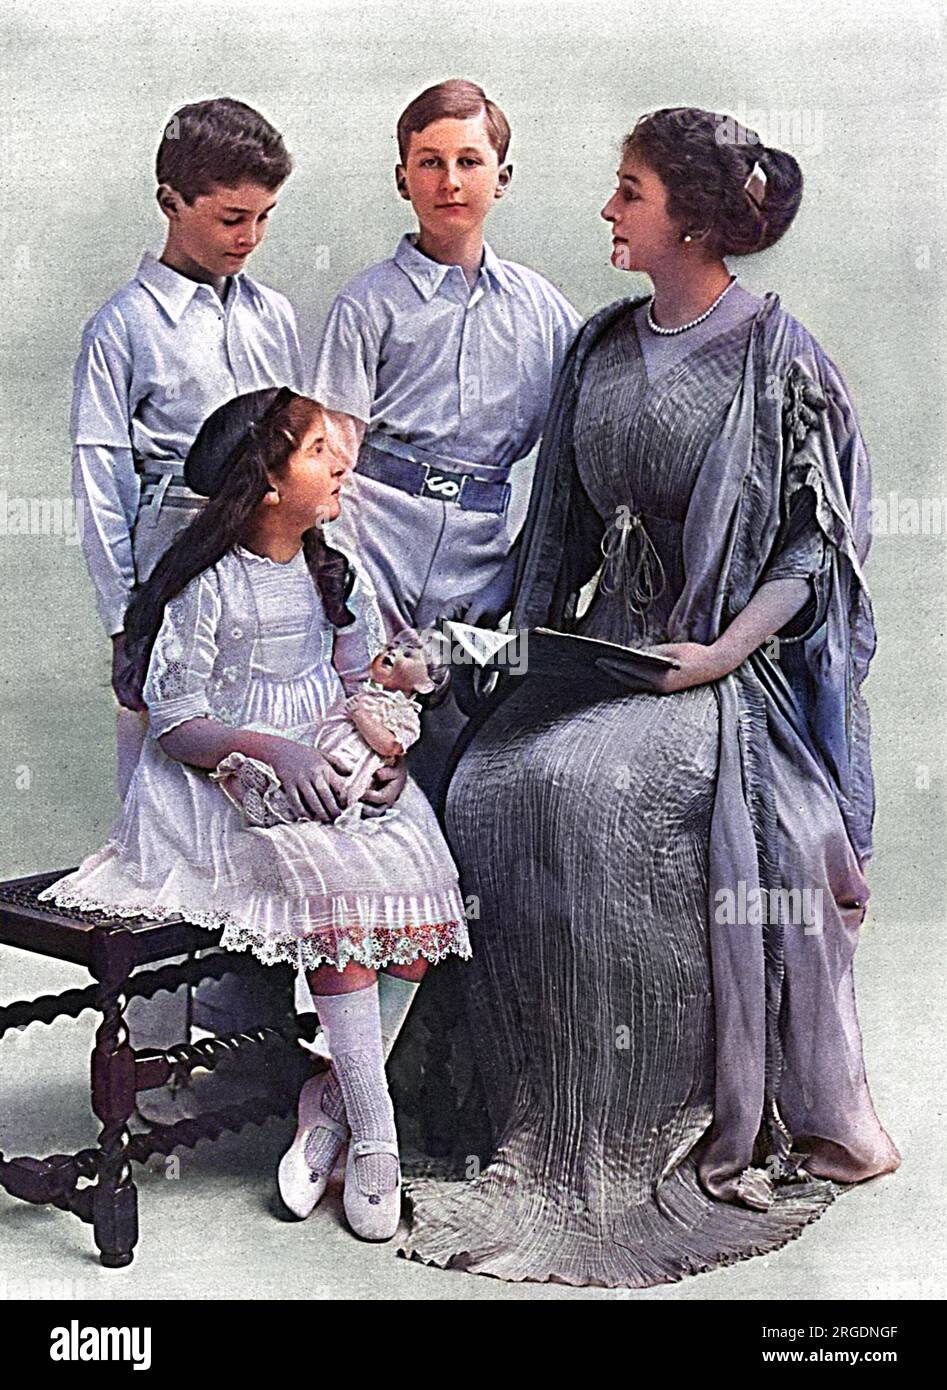 Mrs Alfred Duggan, born Grace Elvina Hinds (1879 - 1958), daughter of Mr. Monroe Hinds, the second wife of George Nathaniel Curzon, 1st Baron Curzon of Kedleston. She is pictured with her three children from her first marriage, Alfred, Hubert and Grace. Lord Curzon had three daughters, but he and Grace could not have any children together. The couple eventually separated. Stock Photo